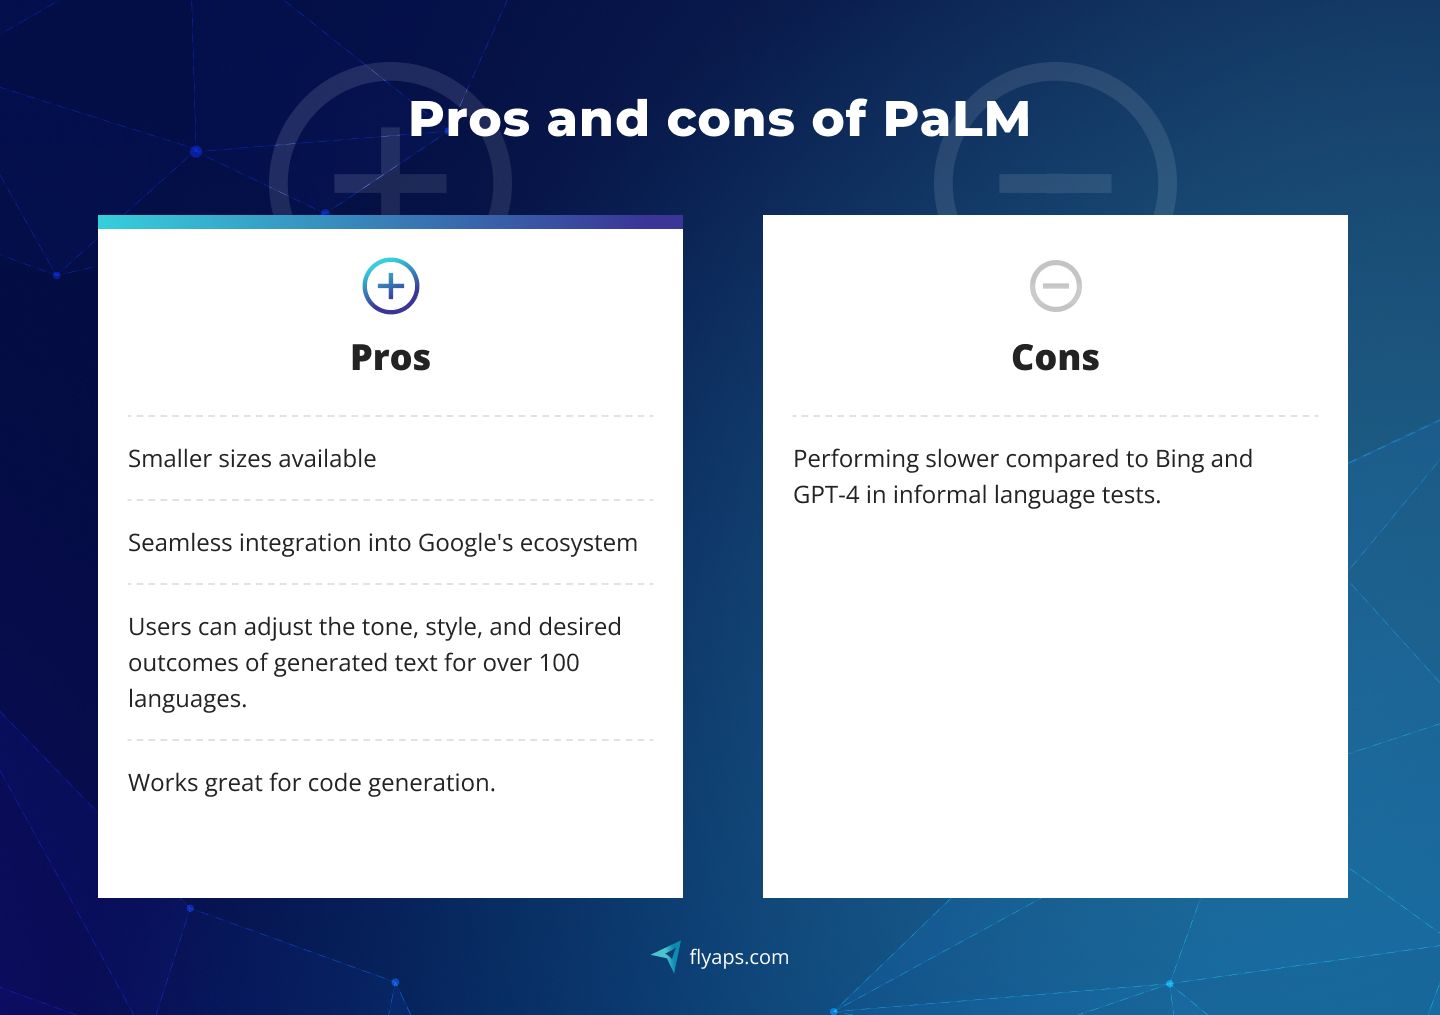 Pros and cons of PaLM